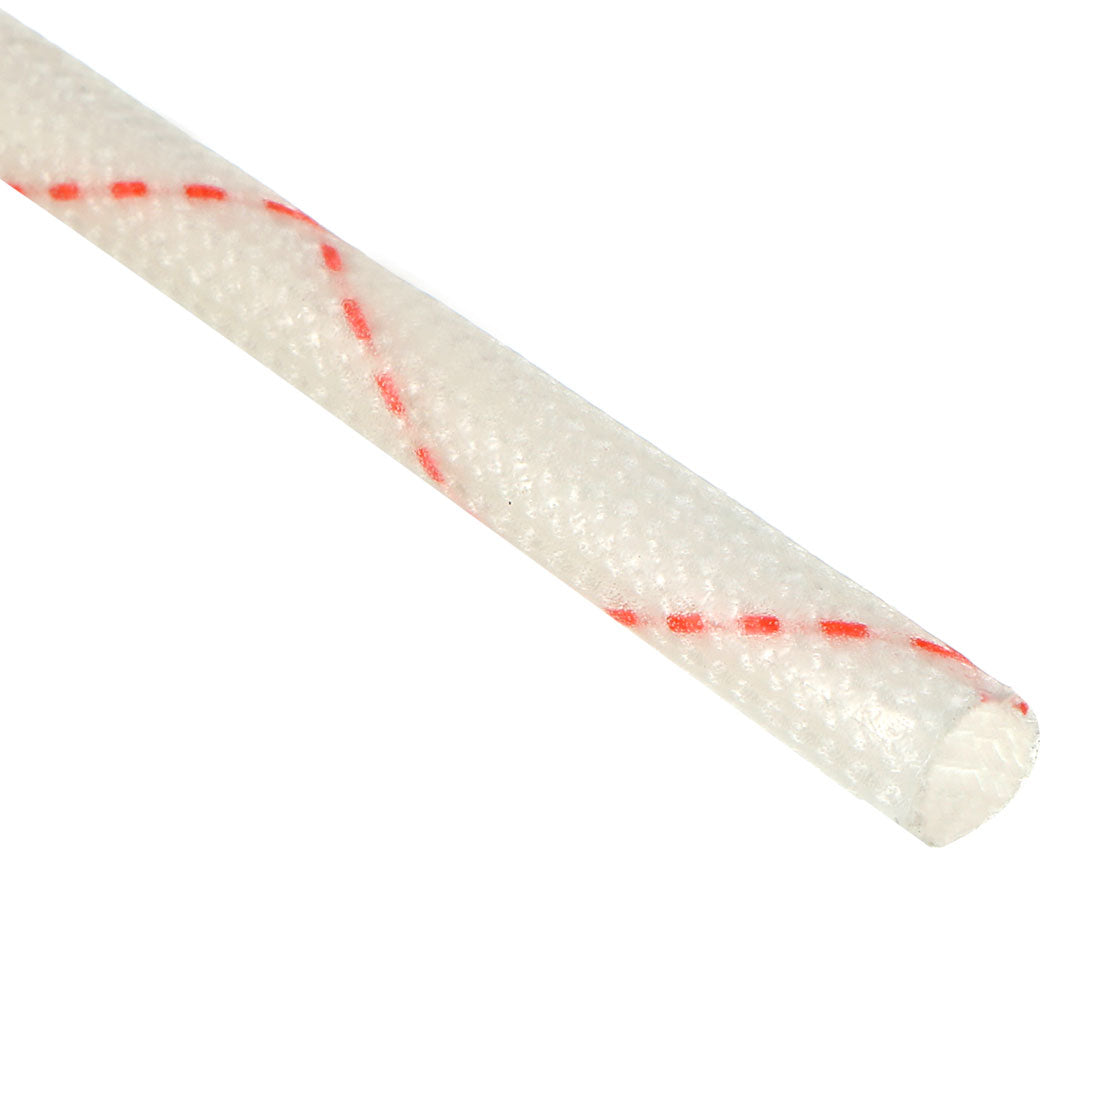 uxcell Uxcell Fiberglass Sleeve 3mm I.D. PVC Insulation Tubing 1500V Tube Adjustable Sleeving Pipe 125 Degree Centigrade Cable Wrap Wire 905mm 2.97ft White and Red